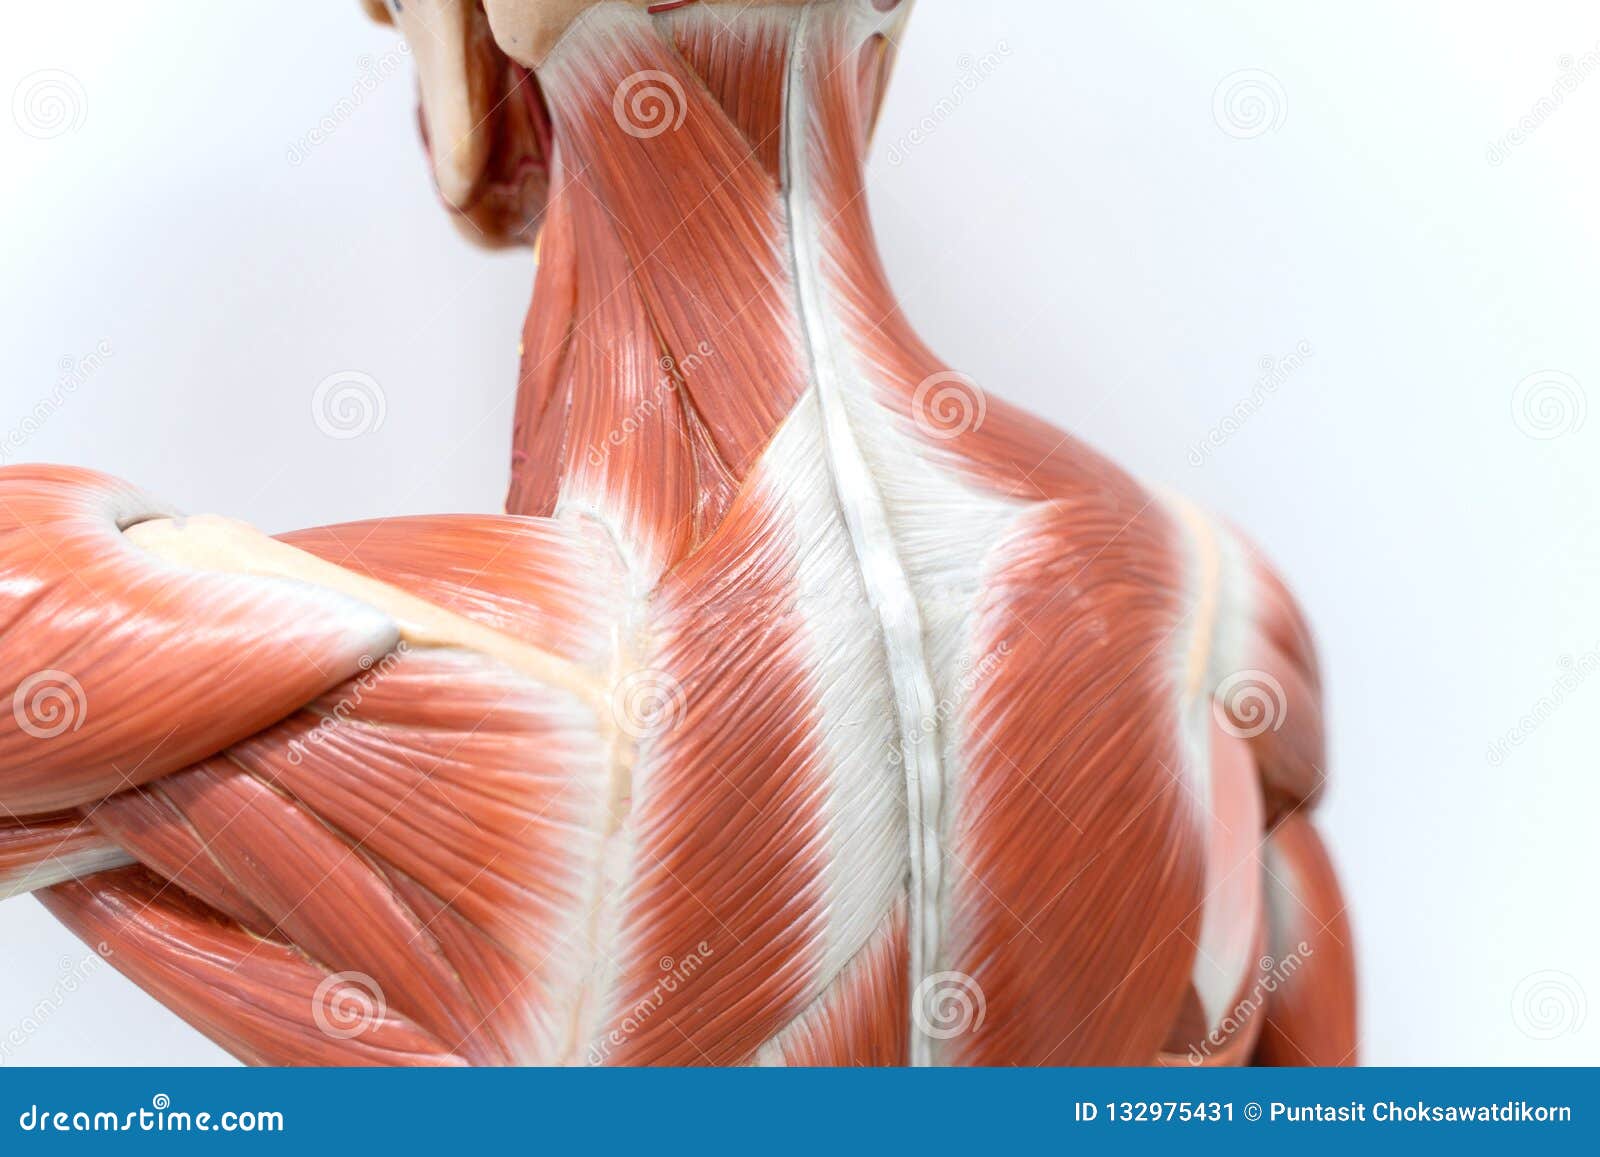 Muscles Of Neck And Back Model For Physiology Education Stock Image Image Of Exercise Attractive 132975431